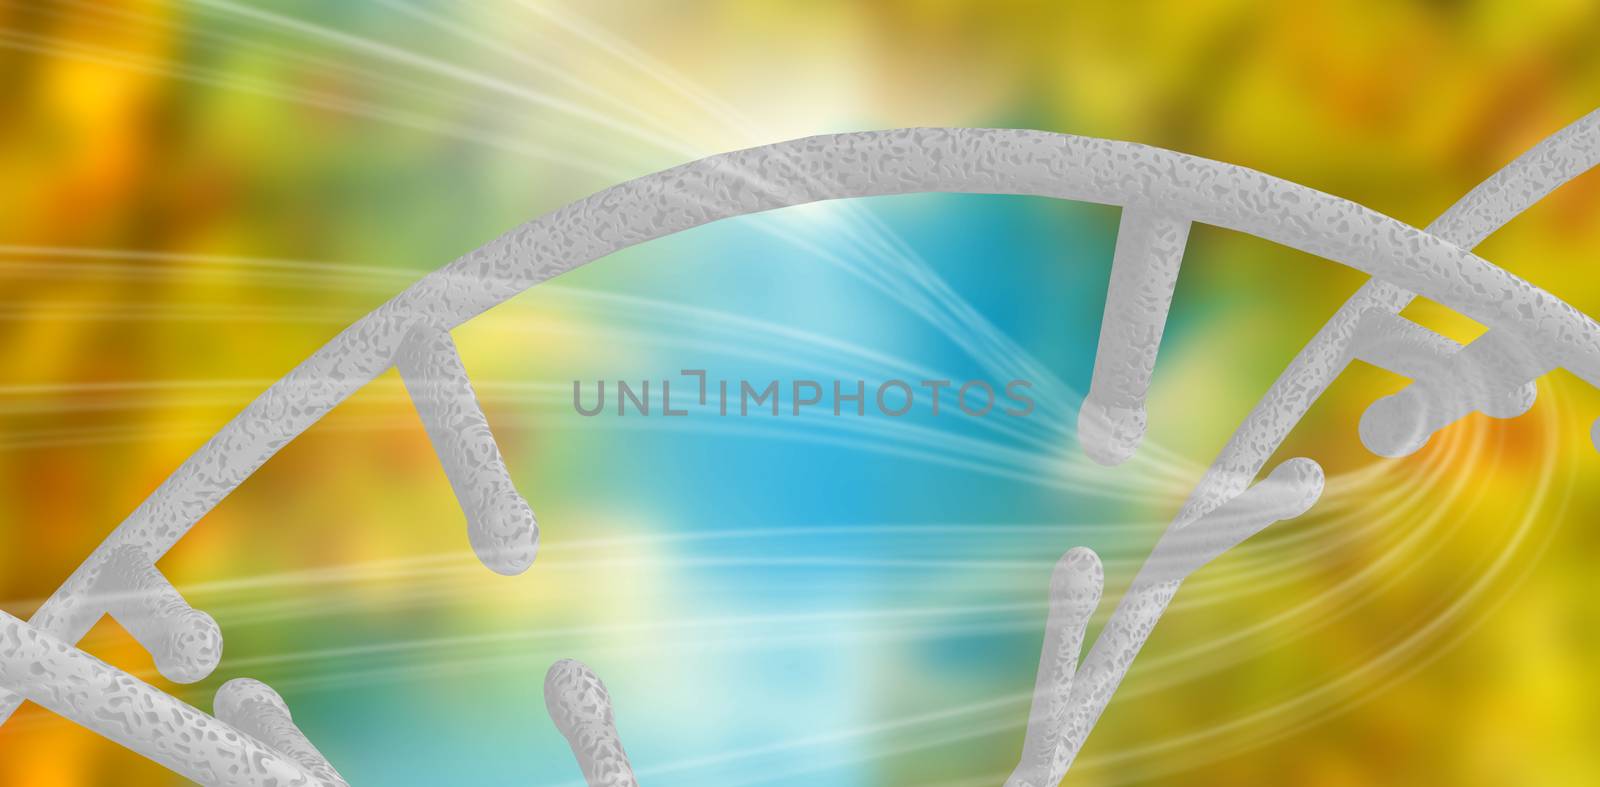 Composite image of image of dna helix by Wavebreakmedia